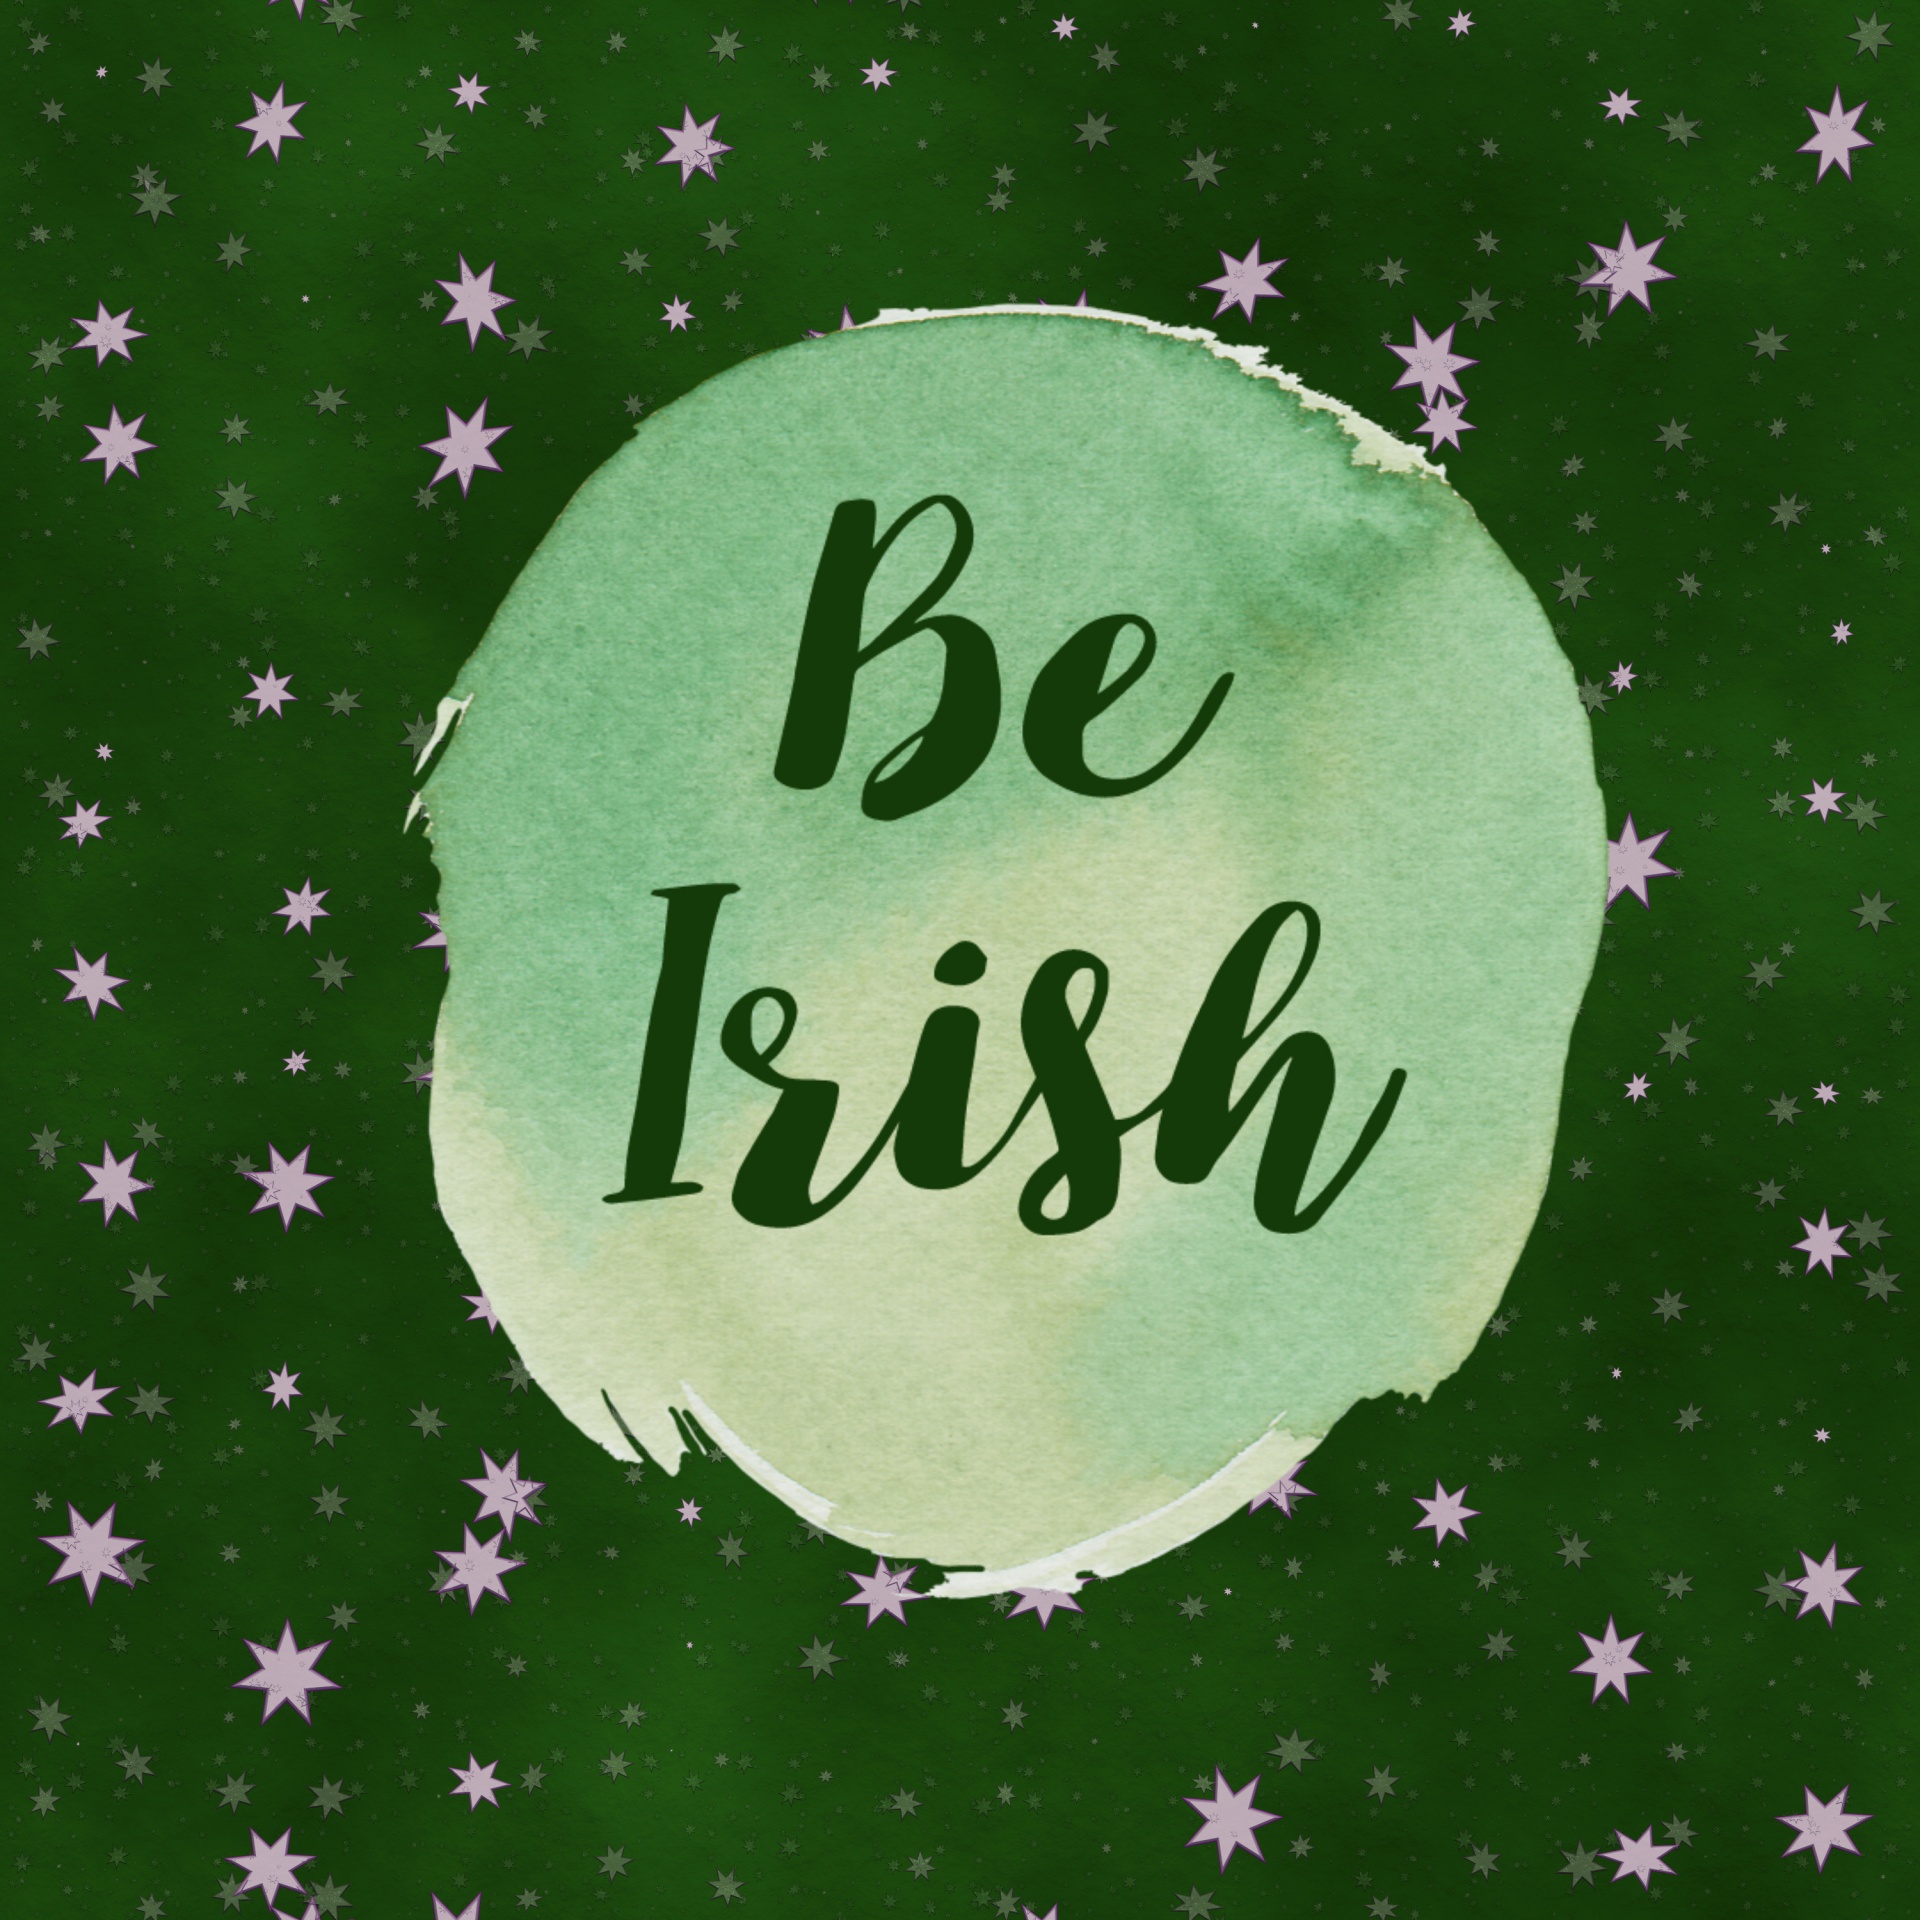 image for St. Patrick's day that reads Be Irish on a star-filled green background